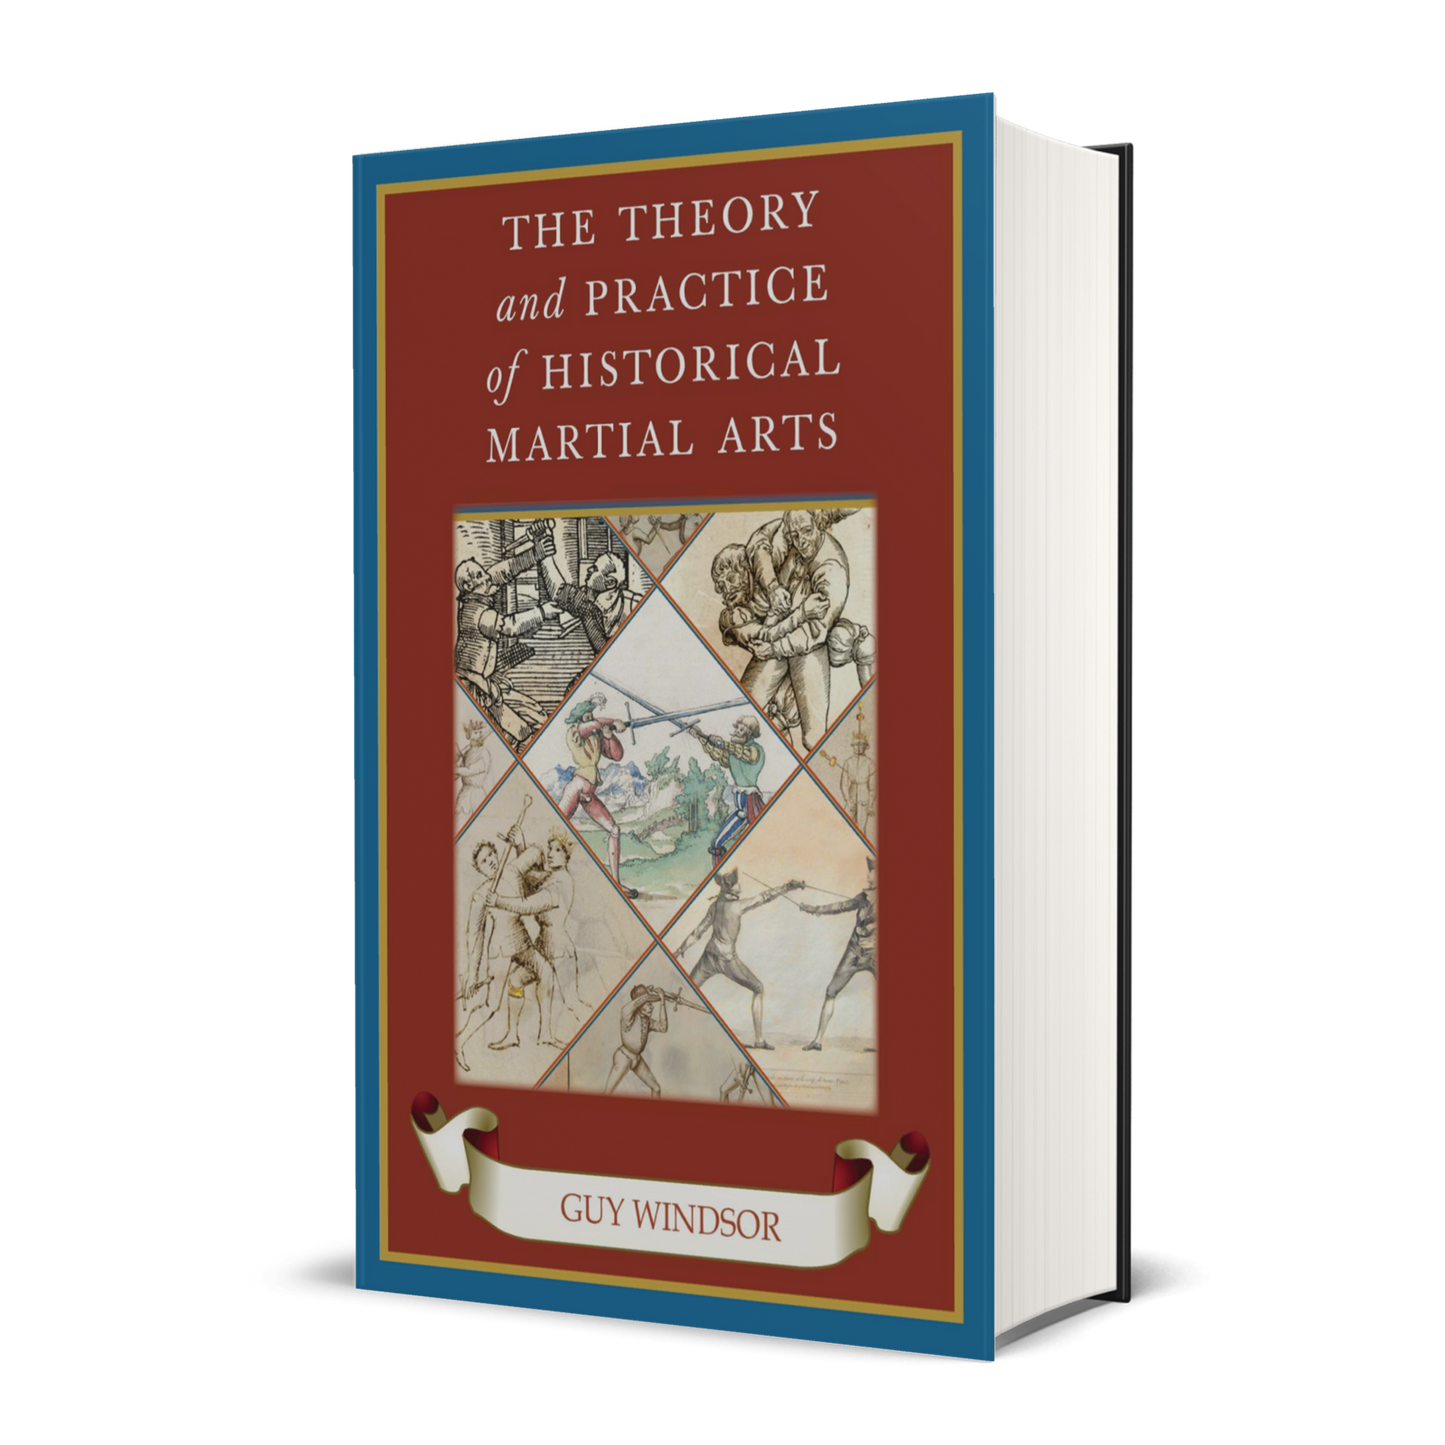 The Theory and Practice of Historical Martial Arts (hardback)